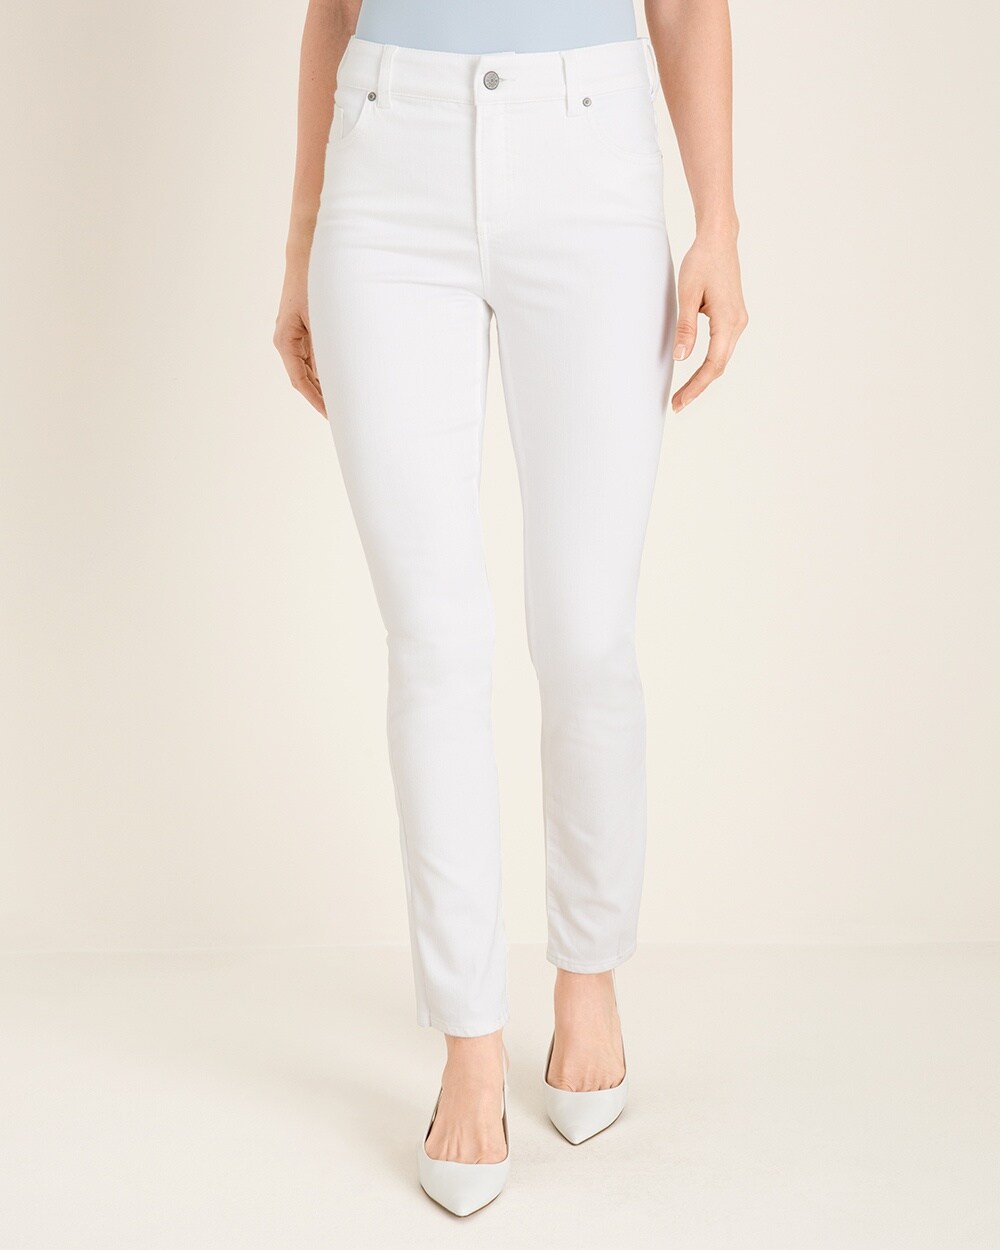 So Slimming No-Stain White Girlfriend Jeans